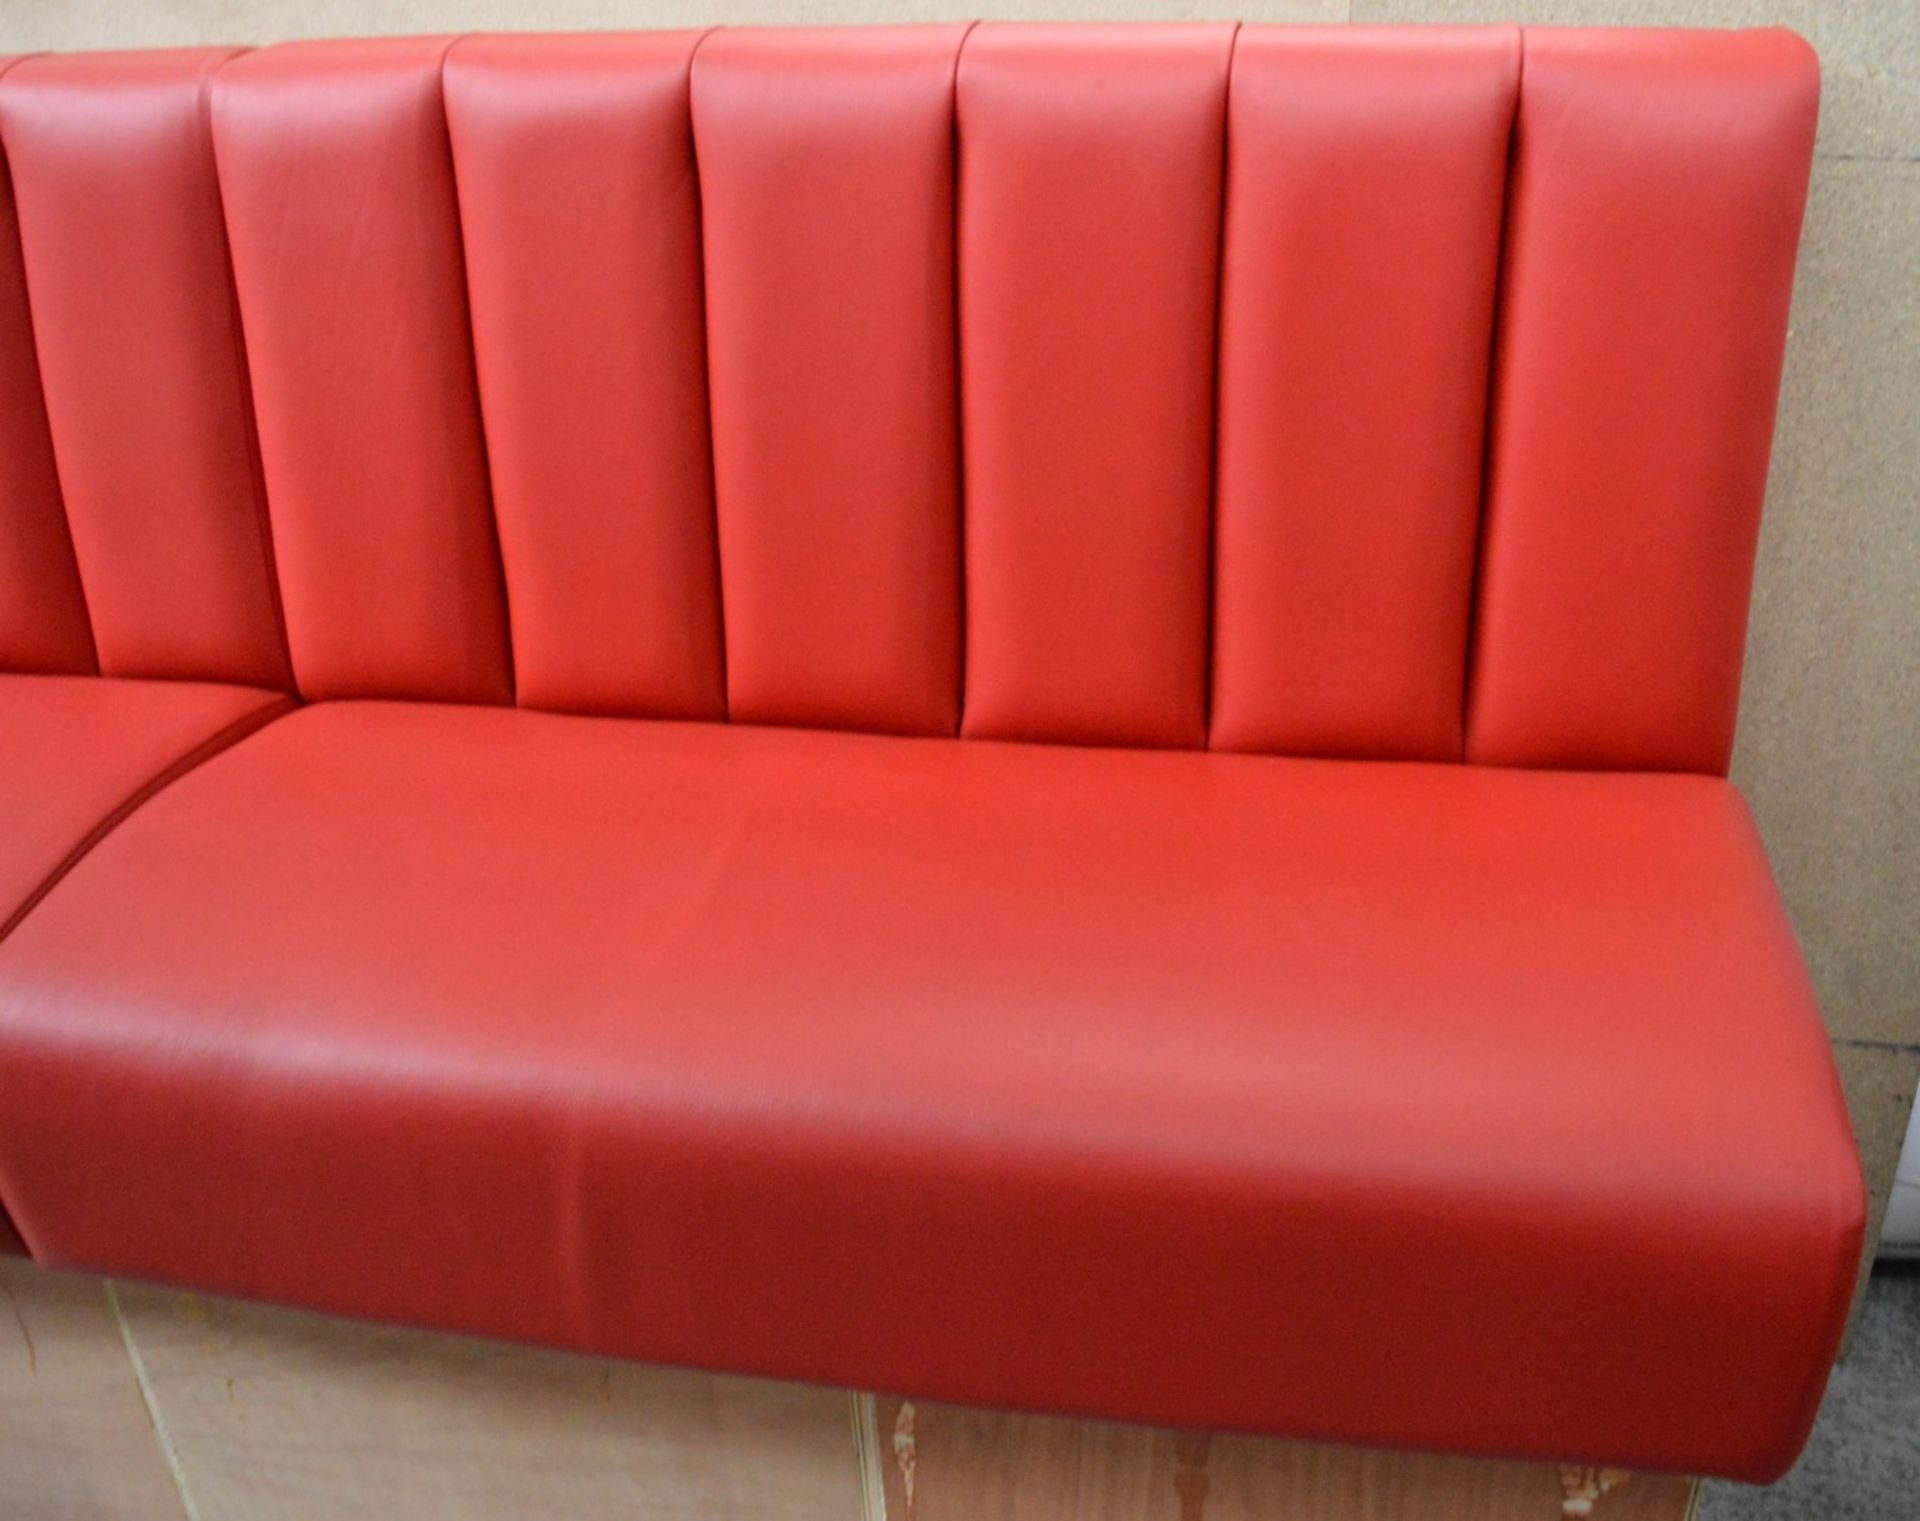 1 x High Seat Double Seating Bench Upholstered in Red Leather - Sits upto Four People - High Quality - Image 7 of 26